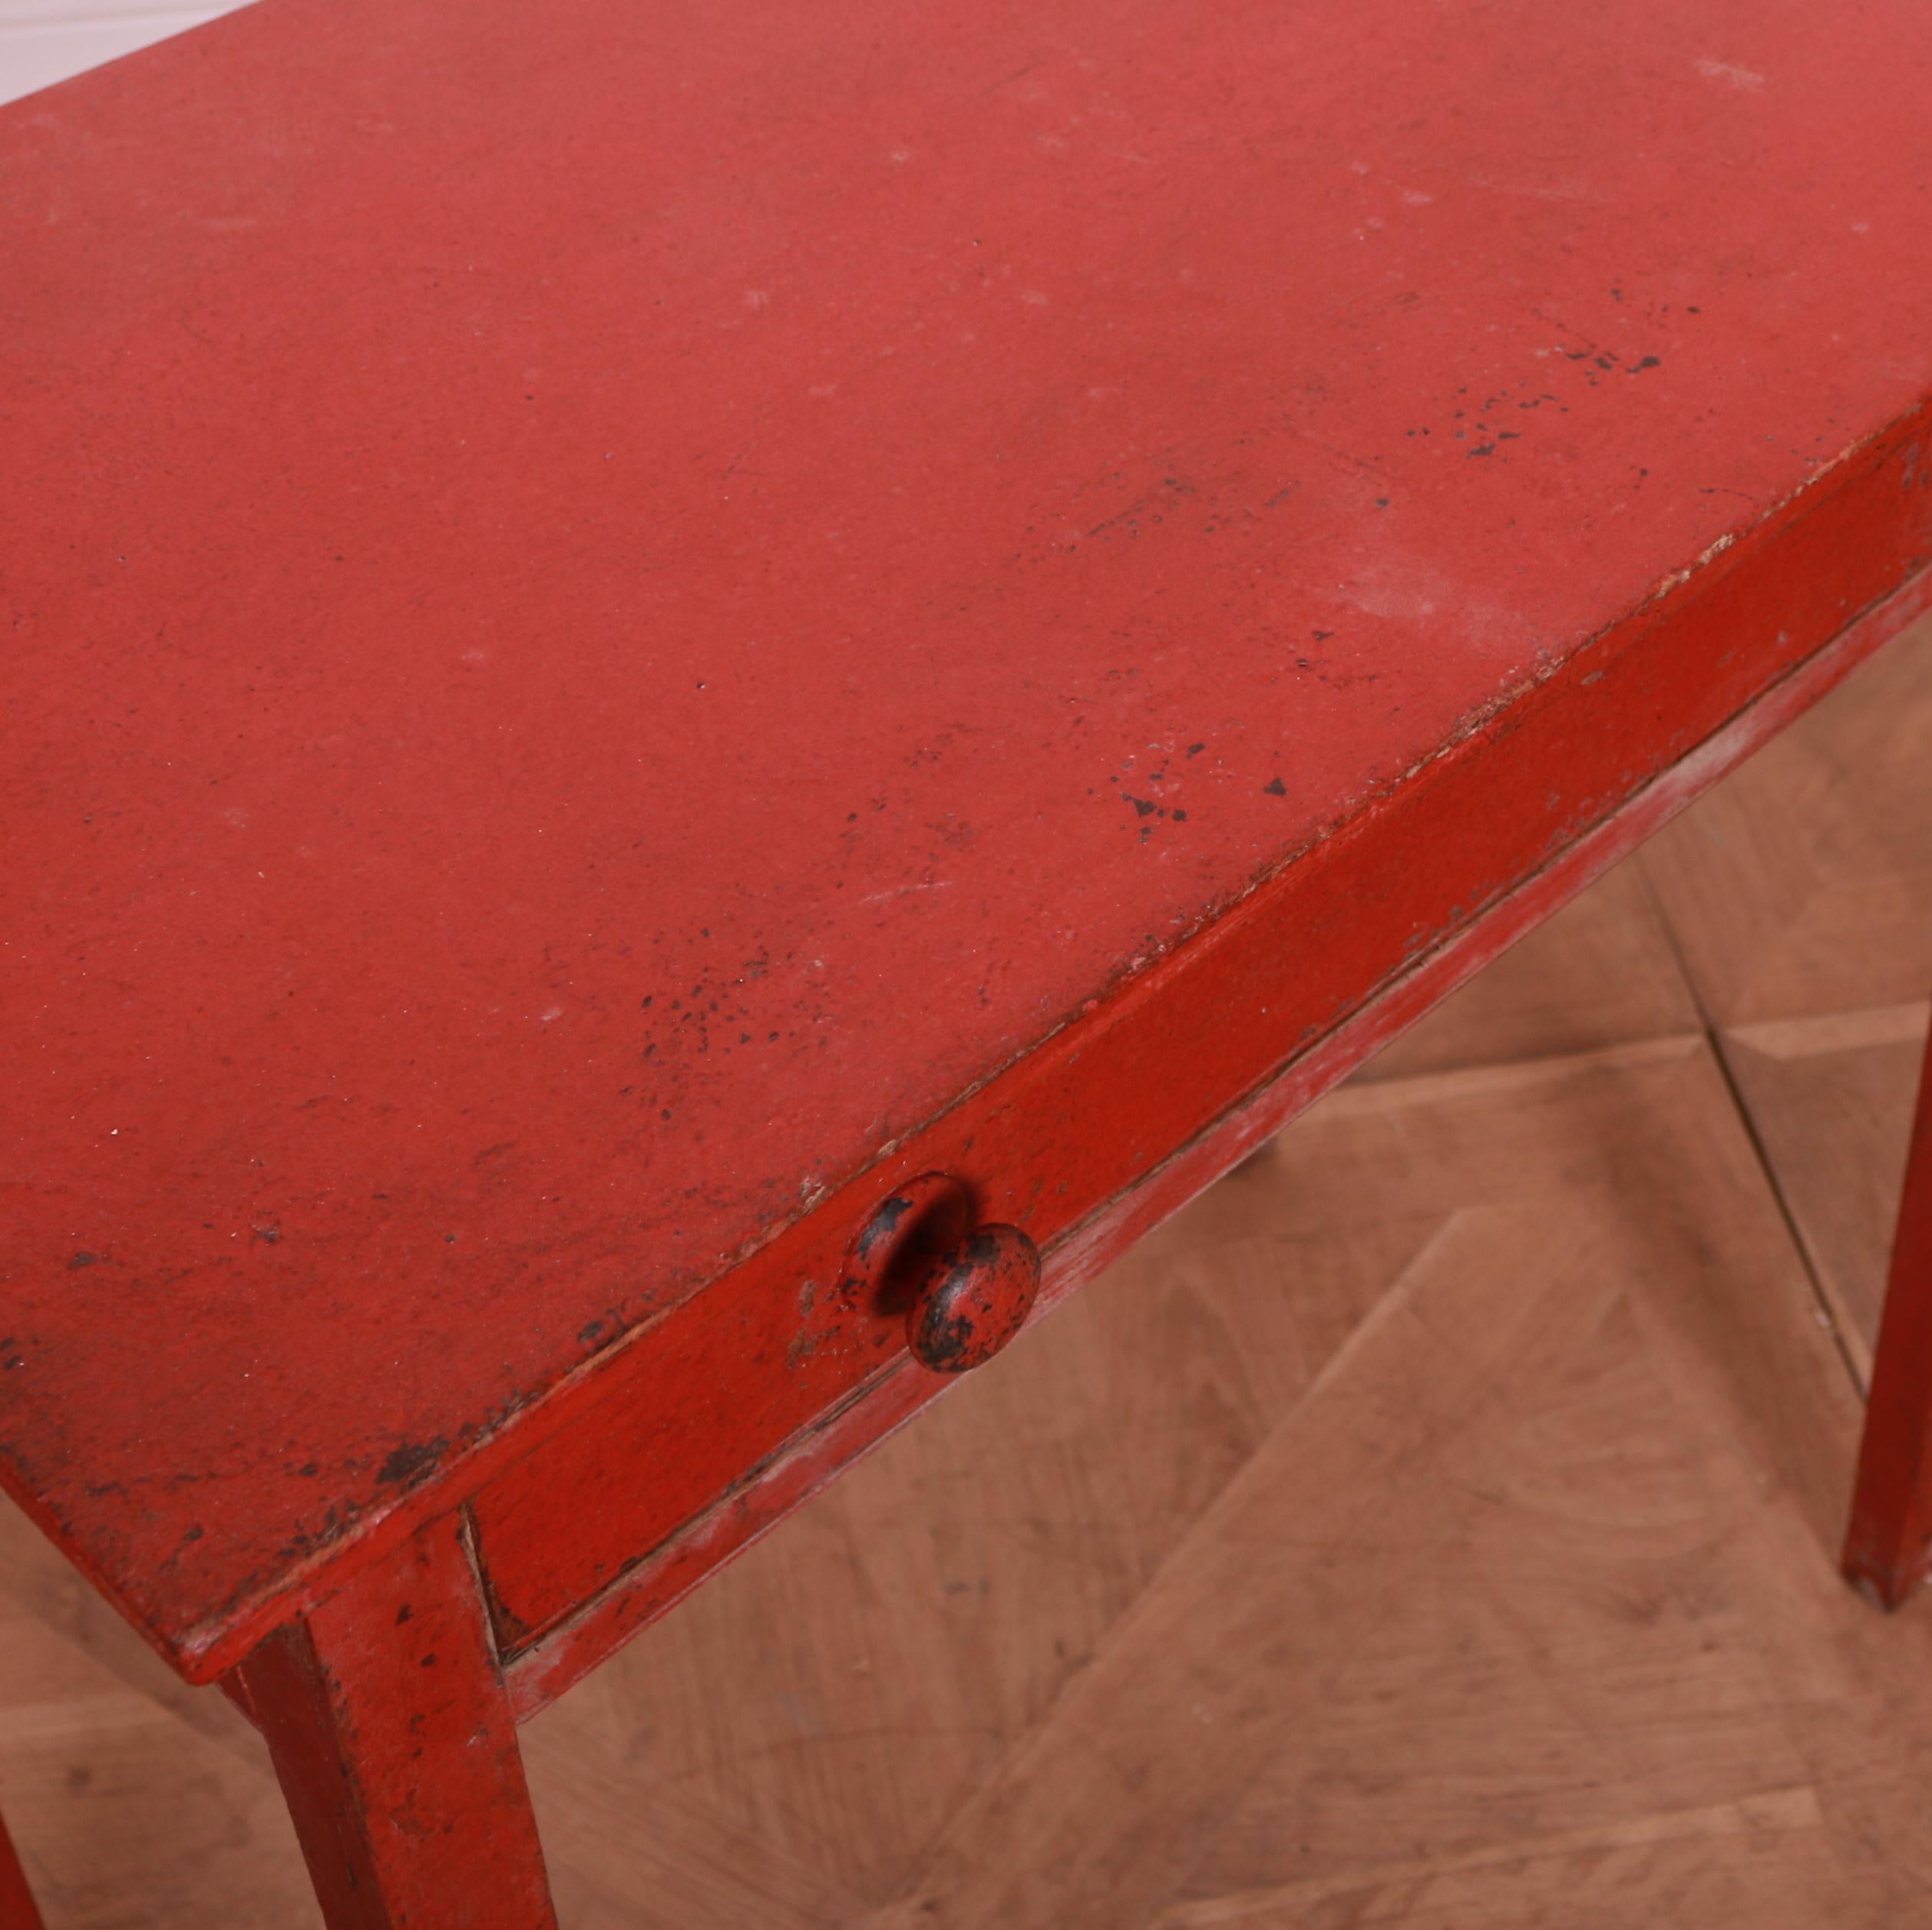 Oak English Painted Lamp Table For Sale